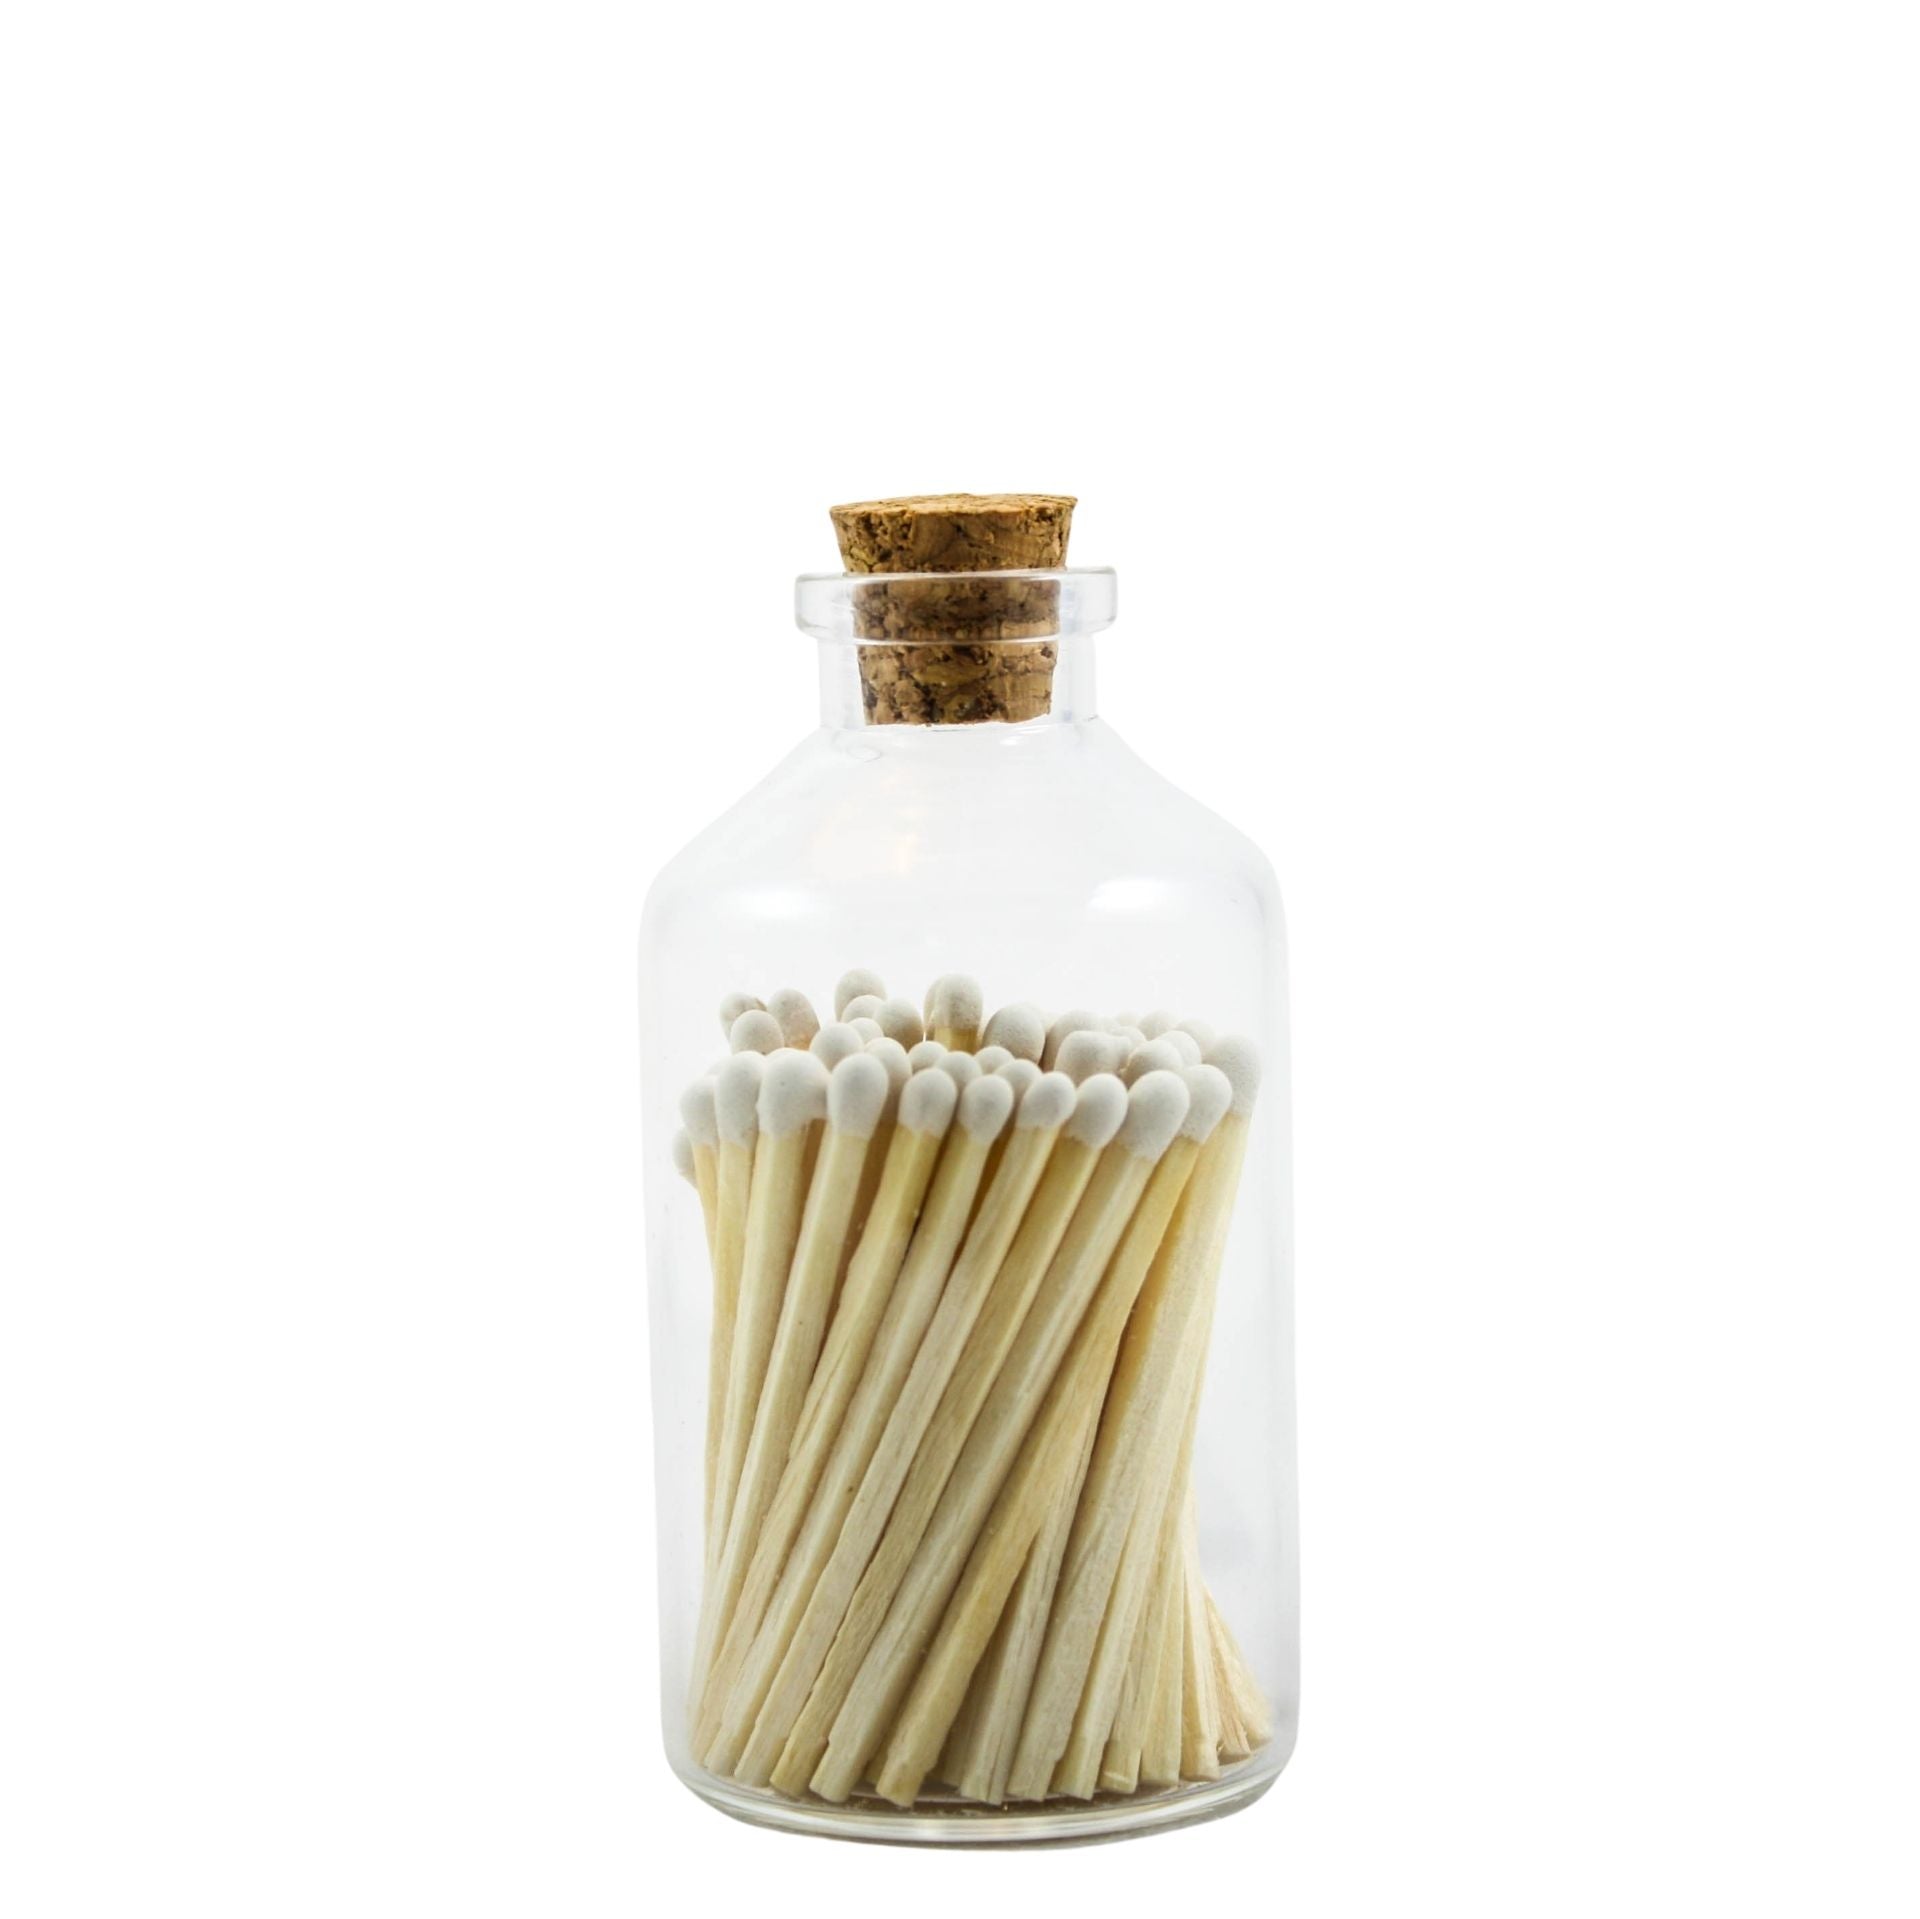 White Tipped Matches in Jar